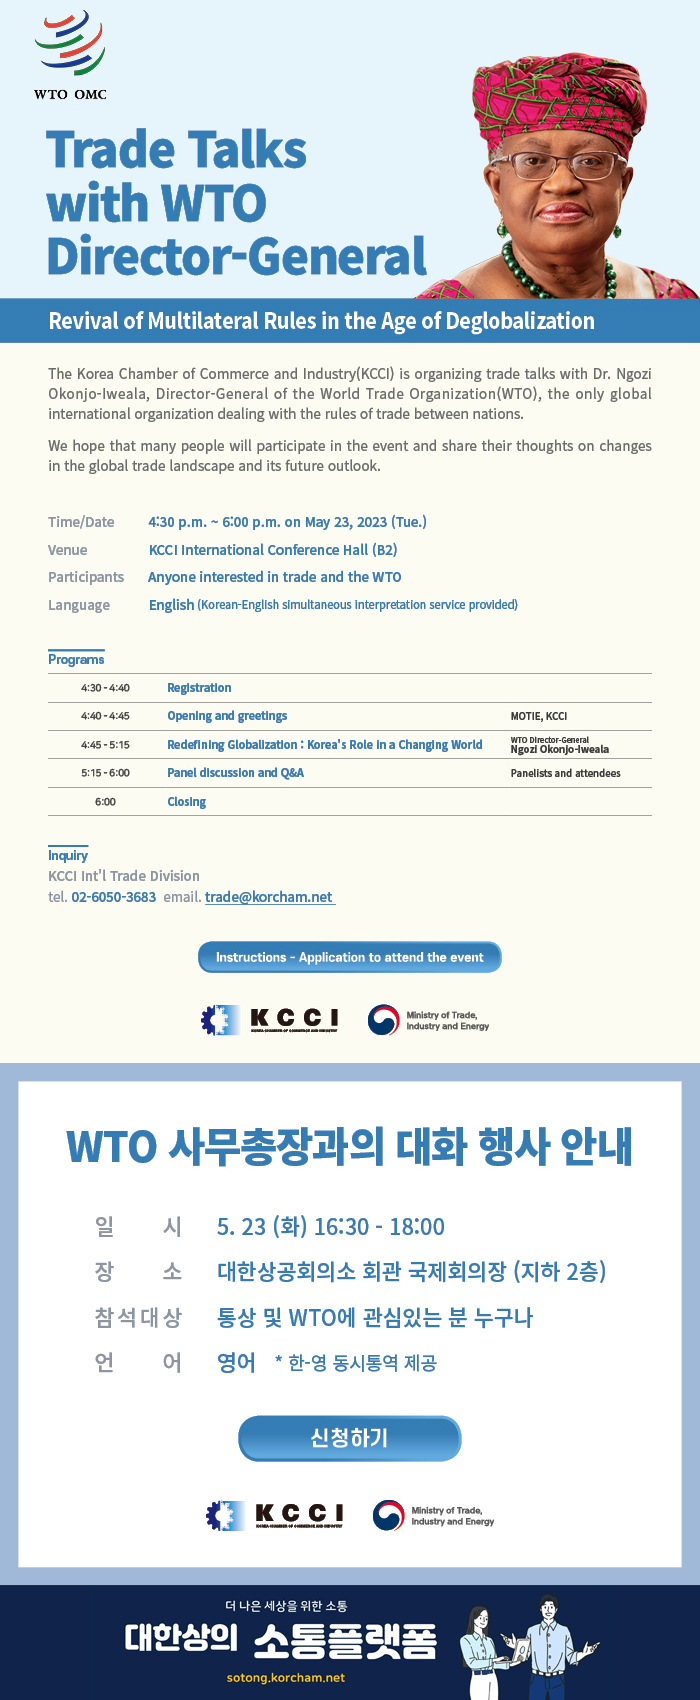 Trade Talks with WTO Director-General